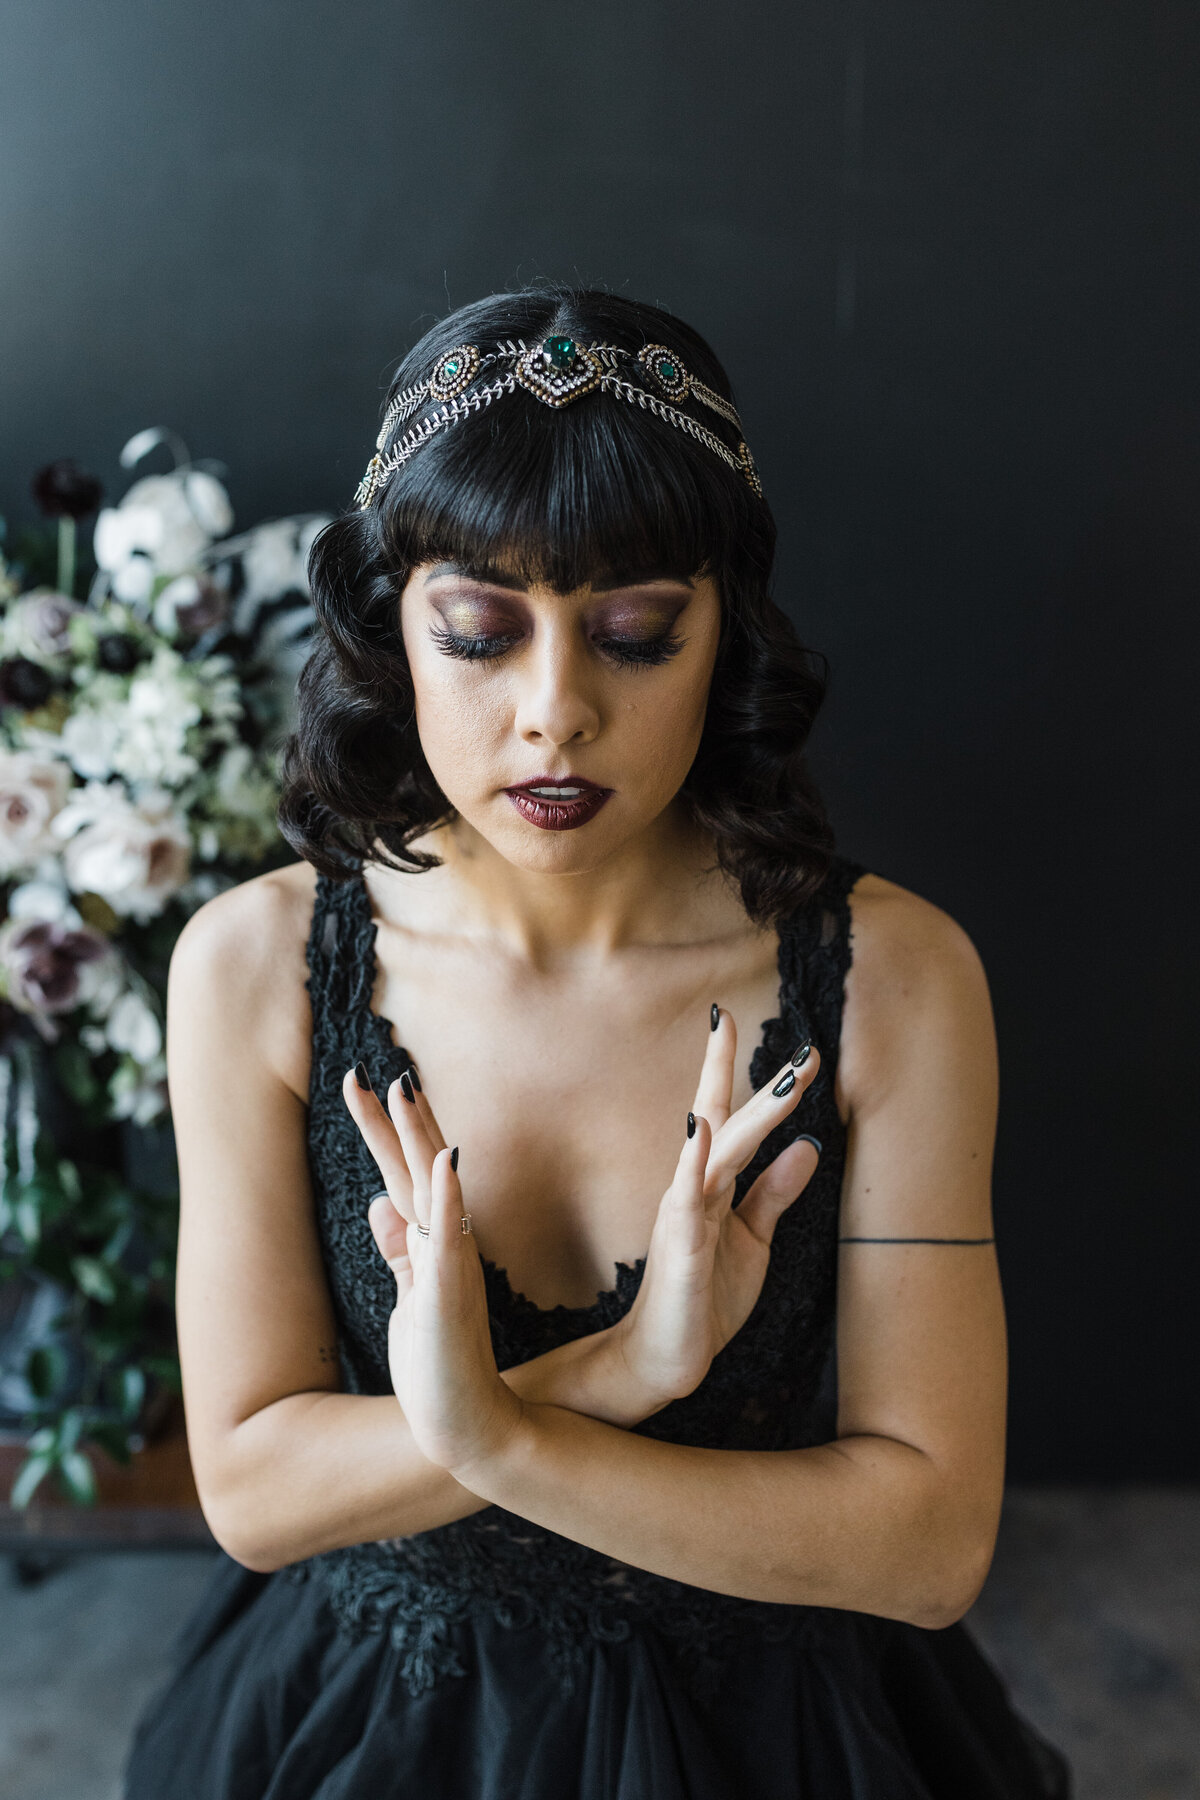 Portrait of a bride on her wedding day in Dallas, Texas. She has her eyes closed and her hands passing by each other as though in deep concentration. She's wearing an intricate black dress,  an ornate headband/tiara, and dark makeup. She poses in front of a bouquet of dark flowers and black background.